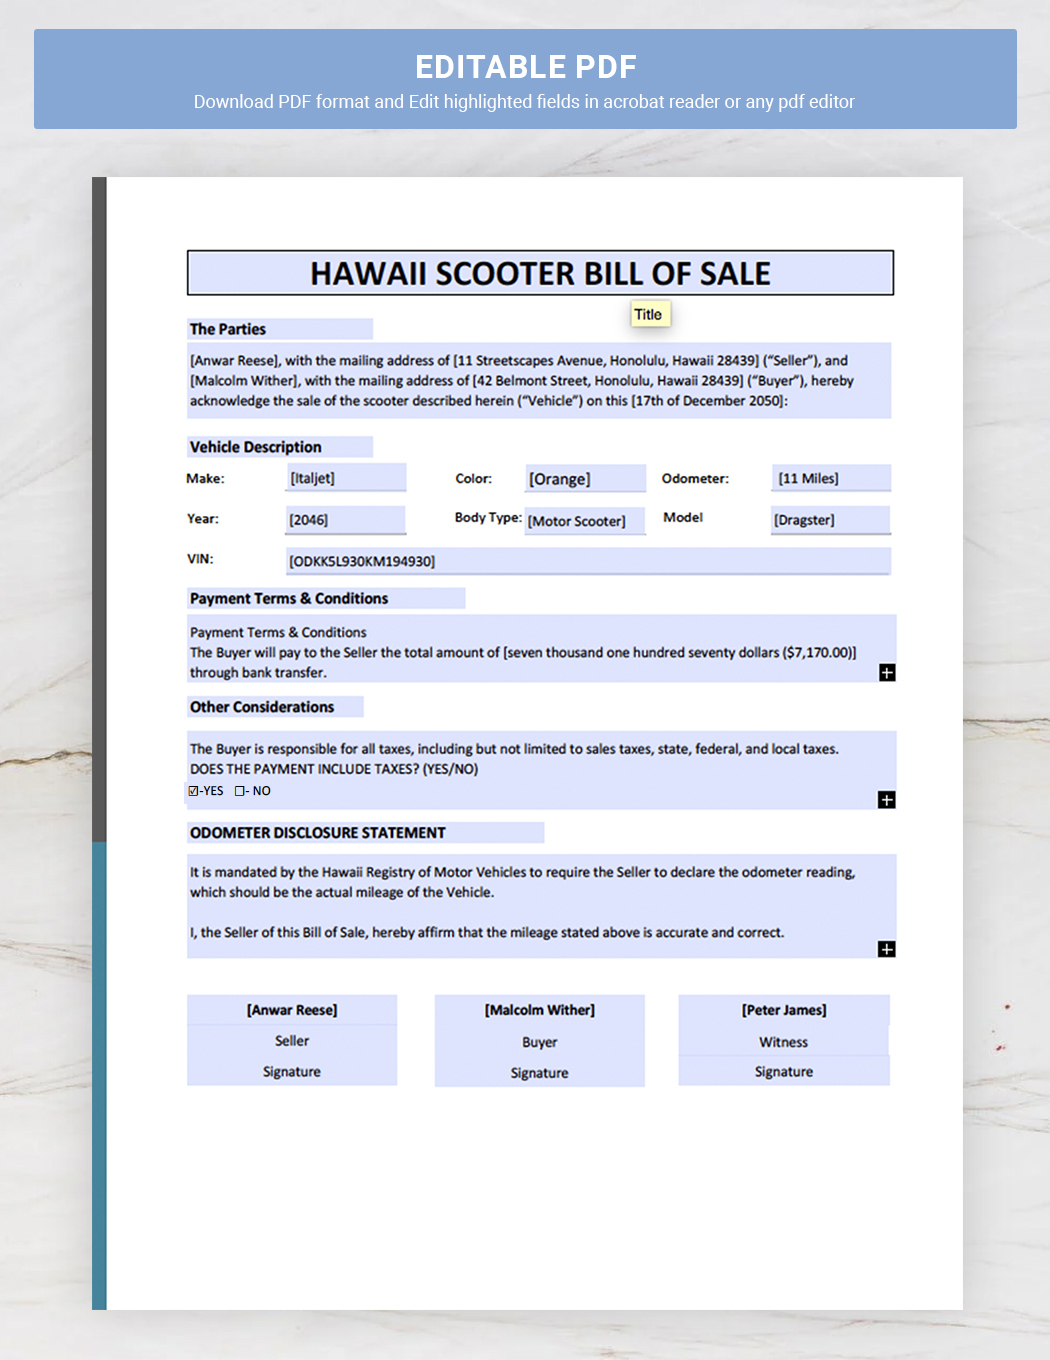 Hawaii Moped / Scooter Bill of Sale Template